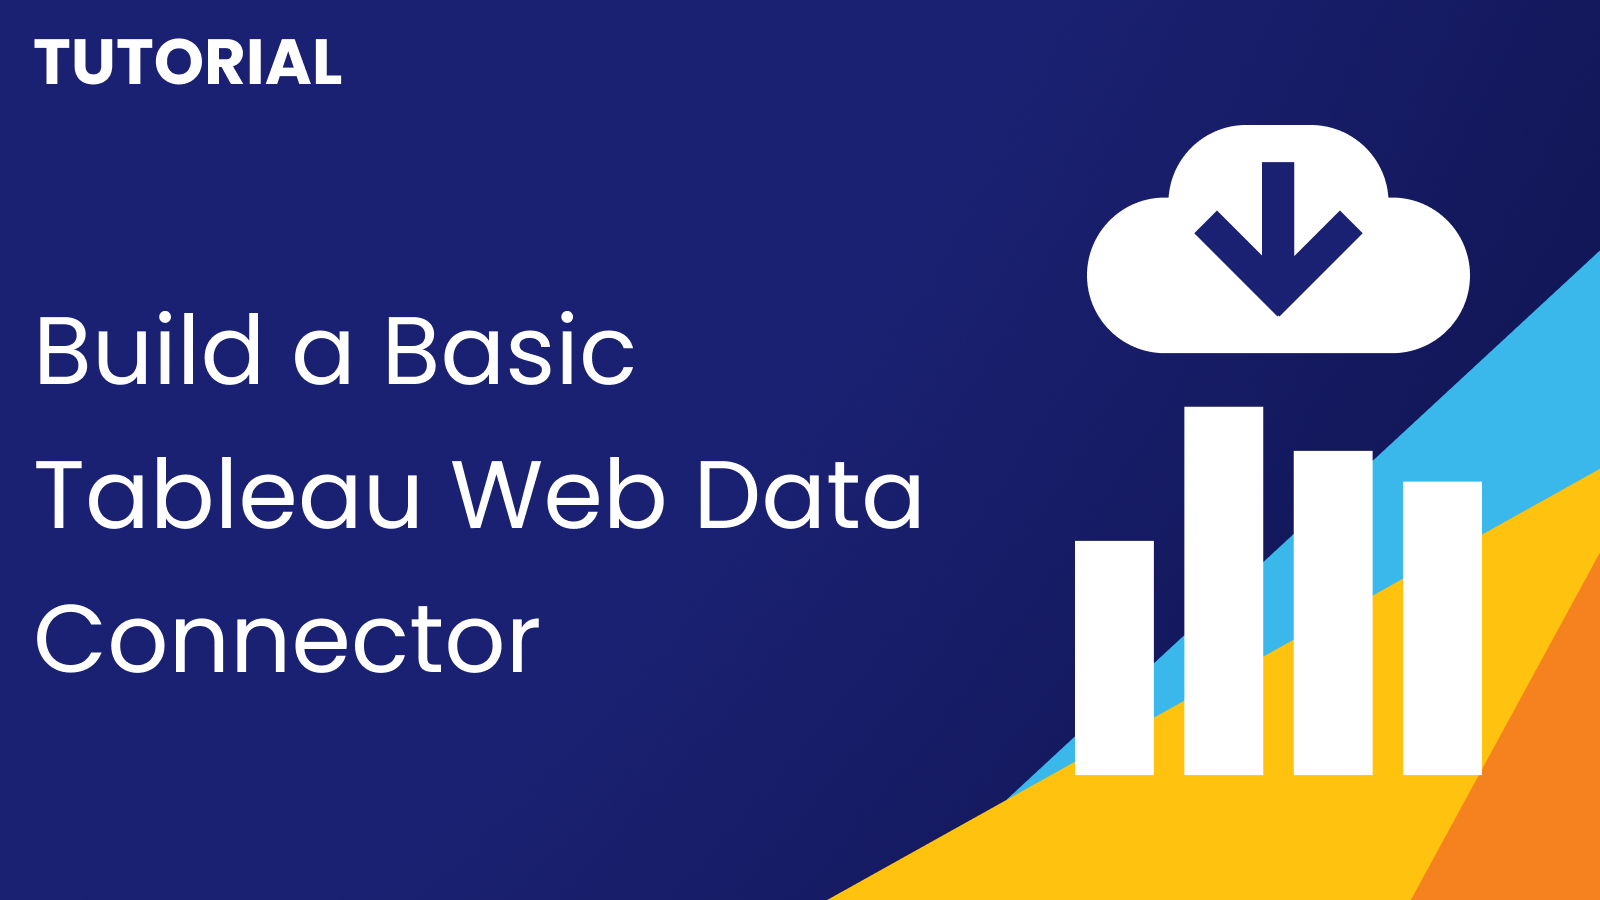 How to Build a Basic Tableau Web Data Connector